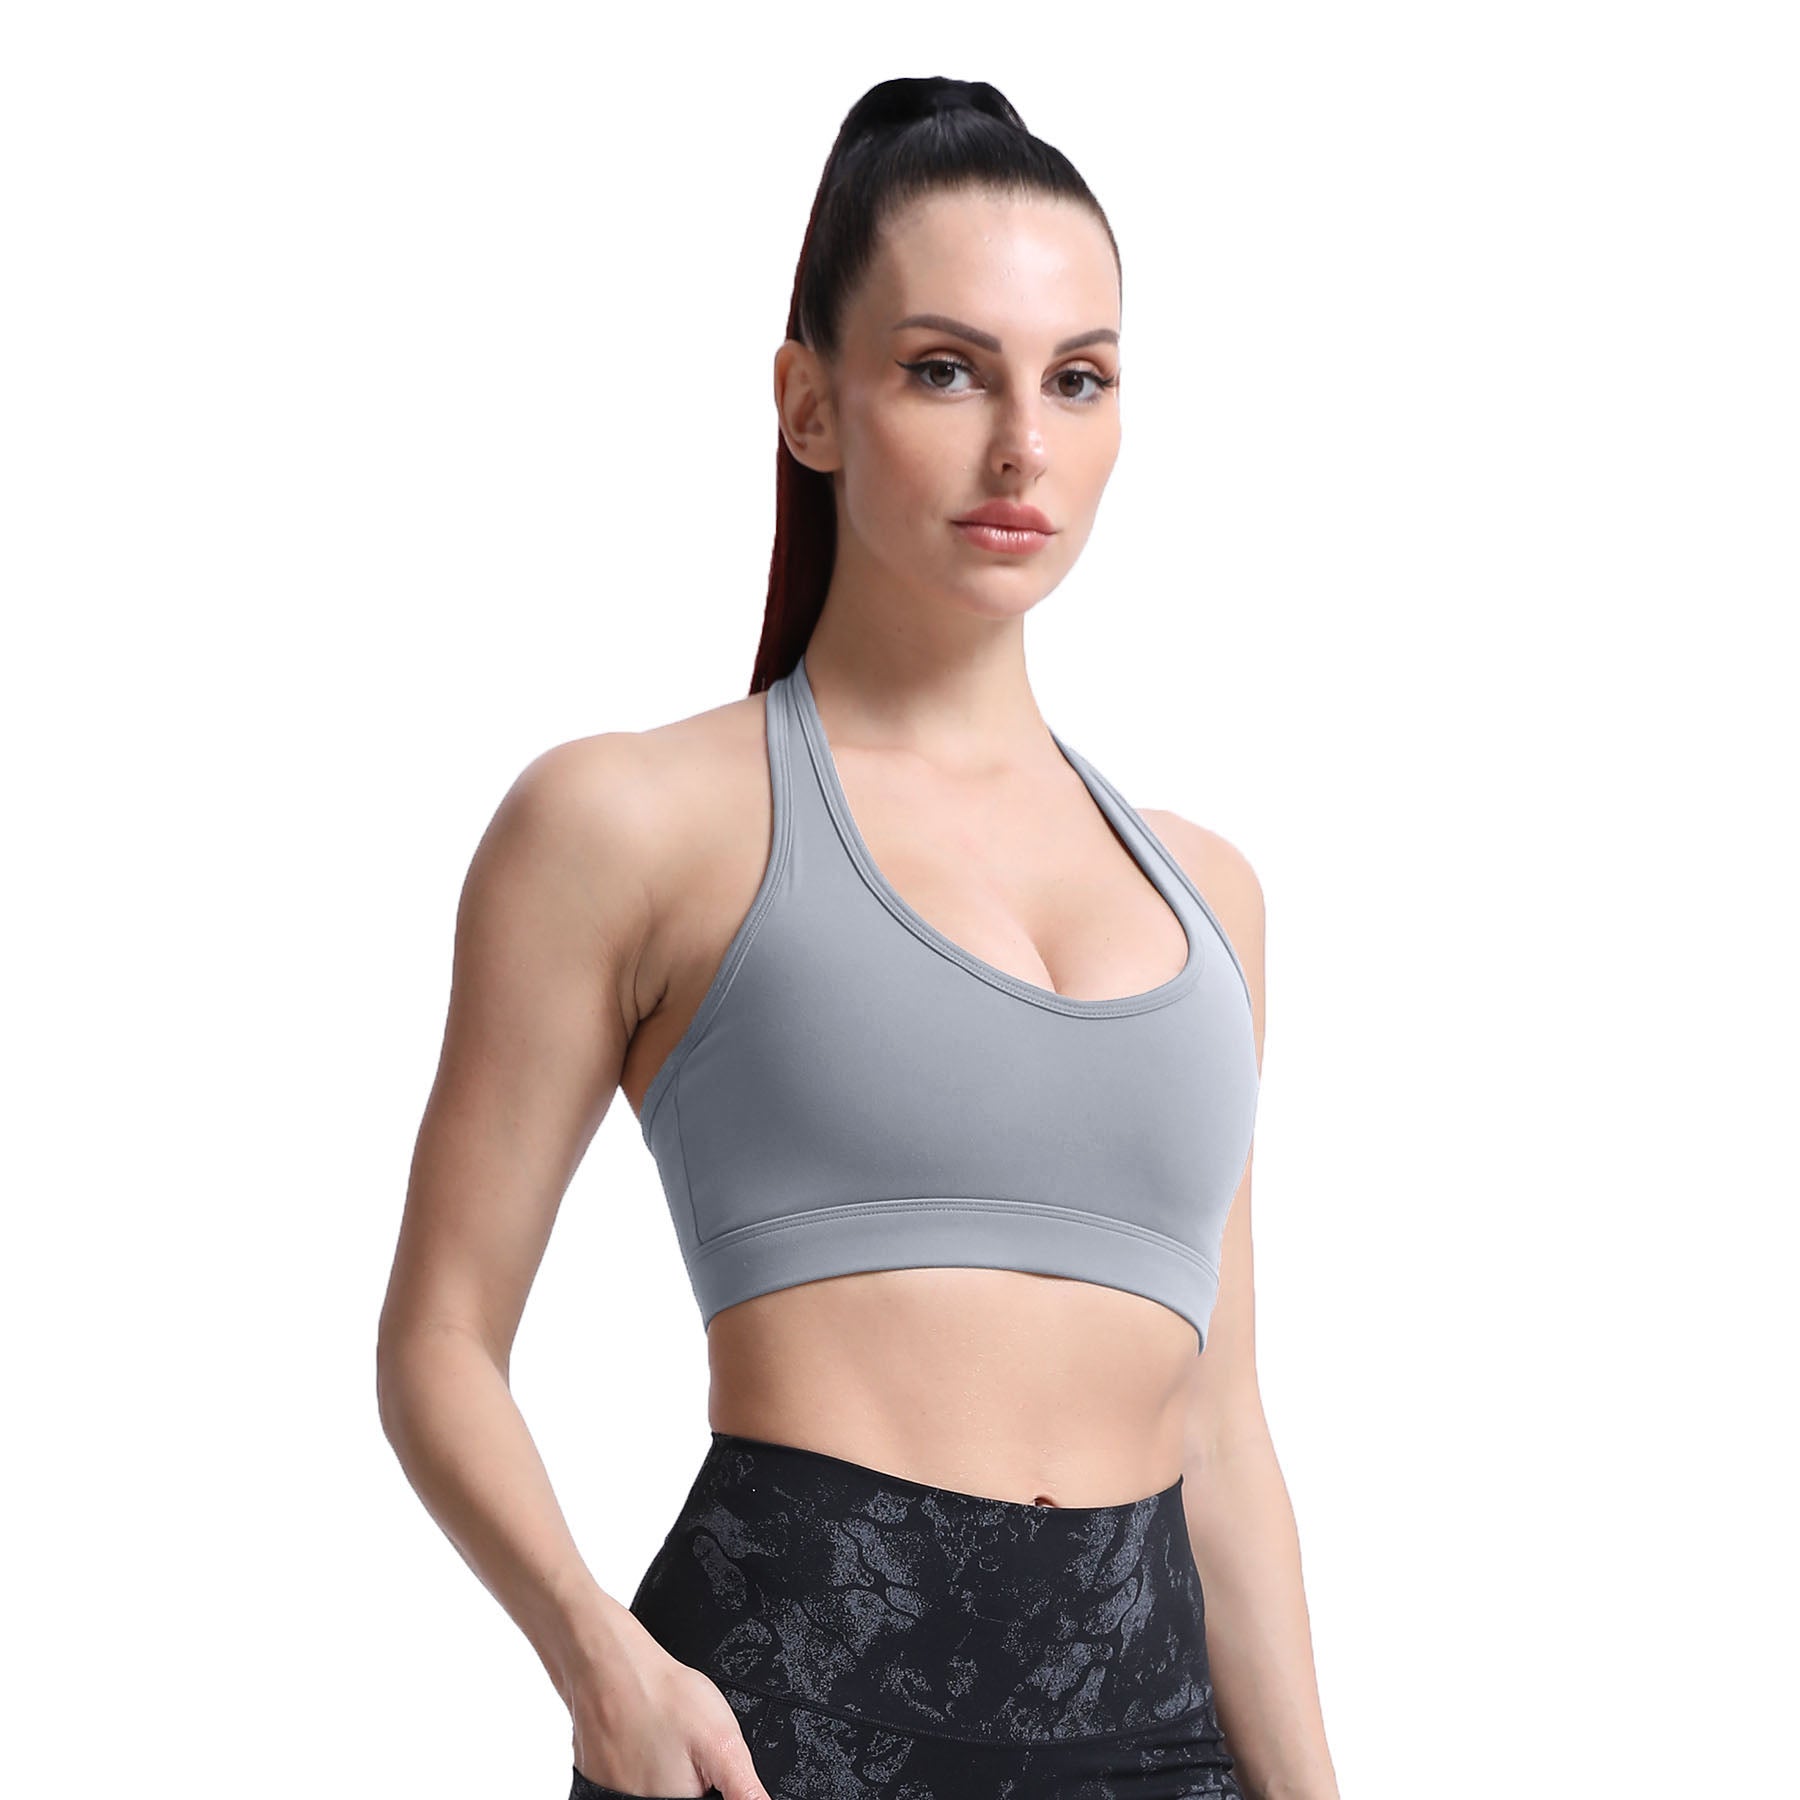  Aoxjox Womens Workout Sports Bras Fitness Padded